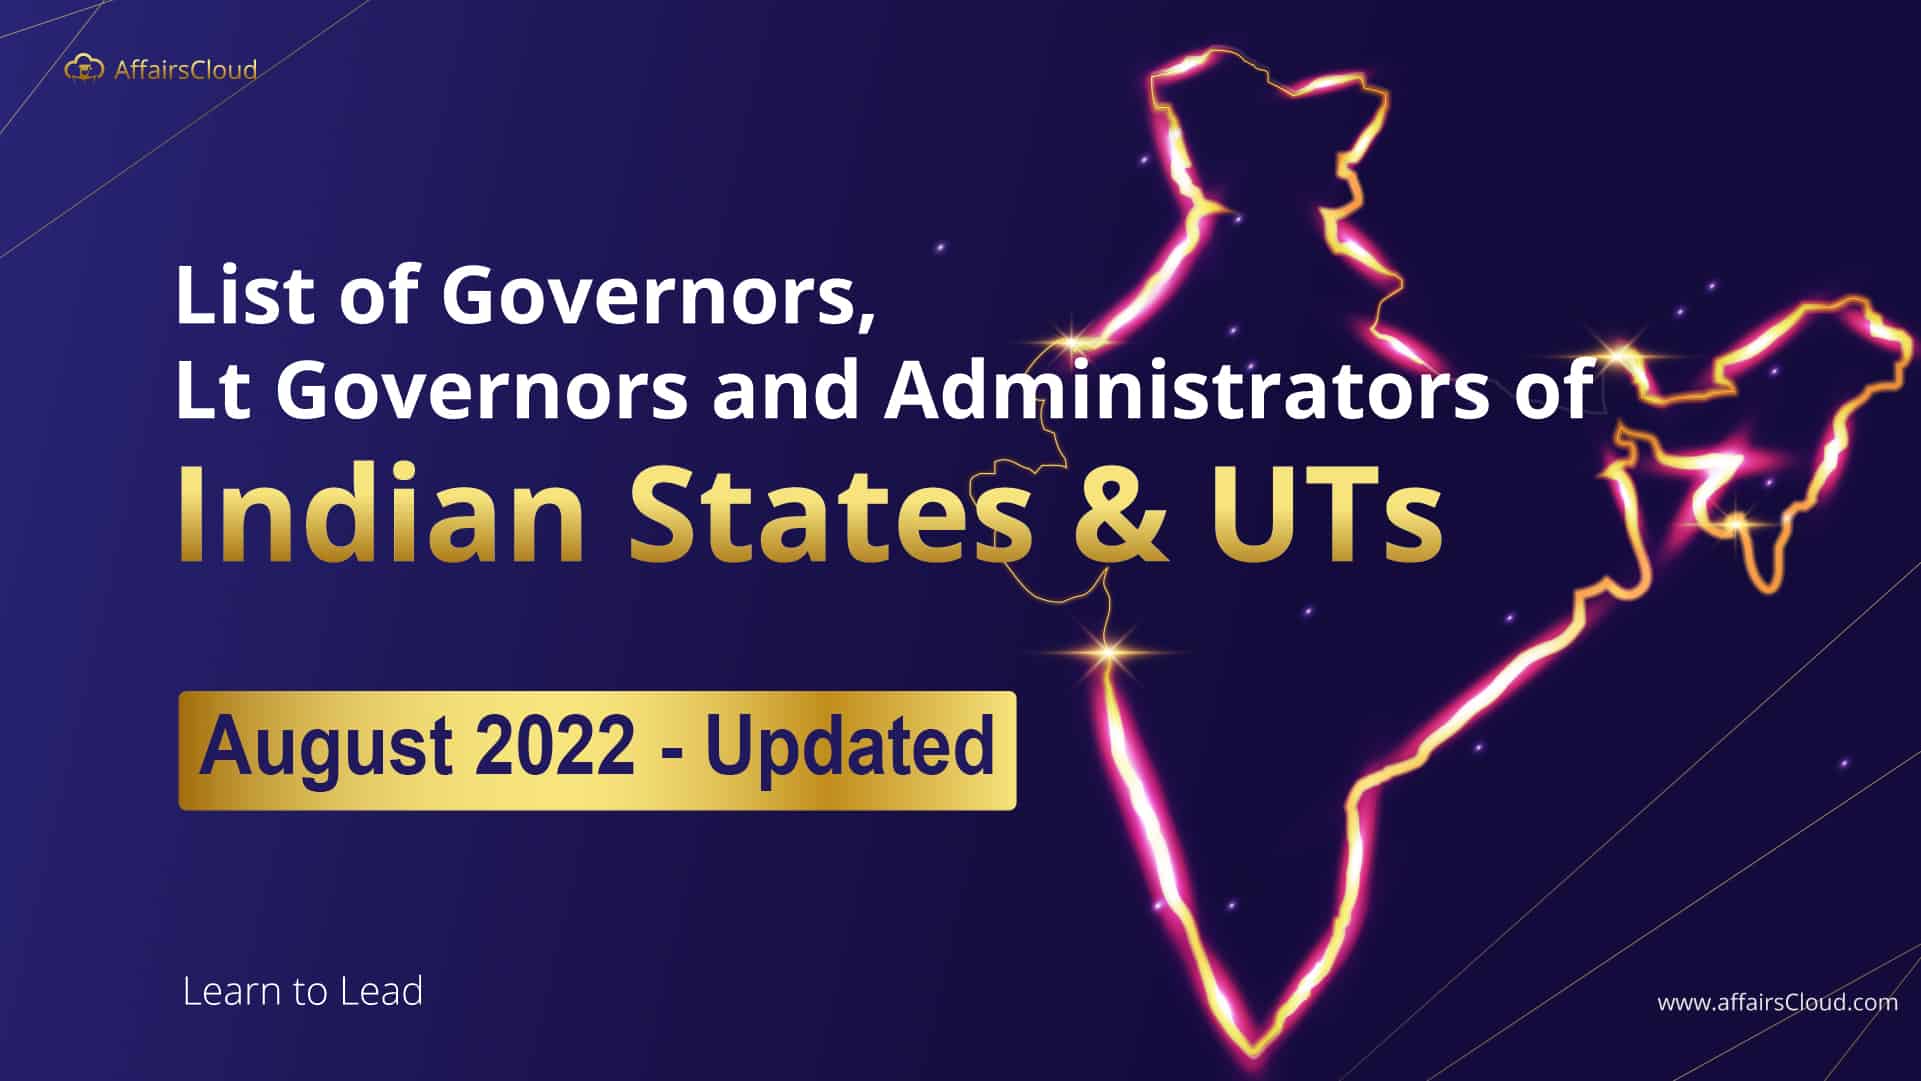 List of Governors August 2022